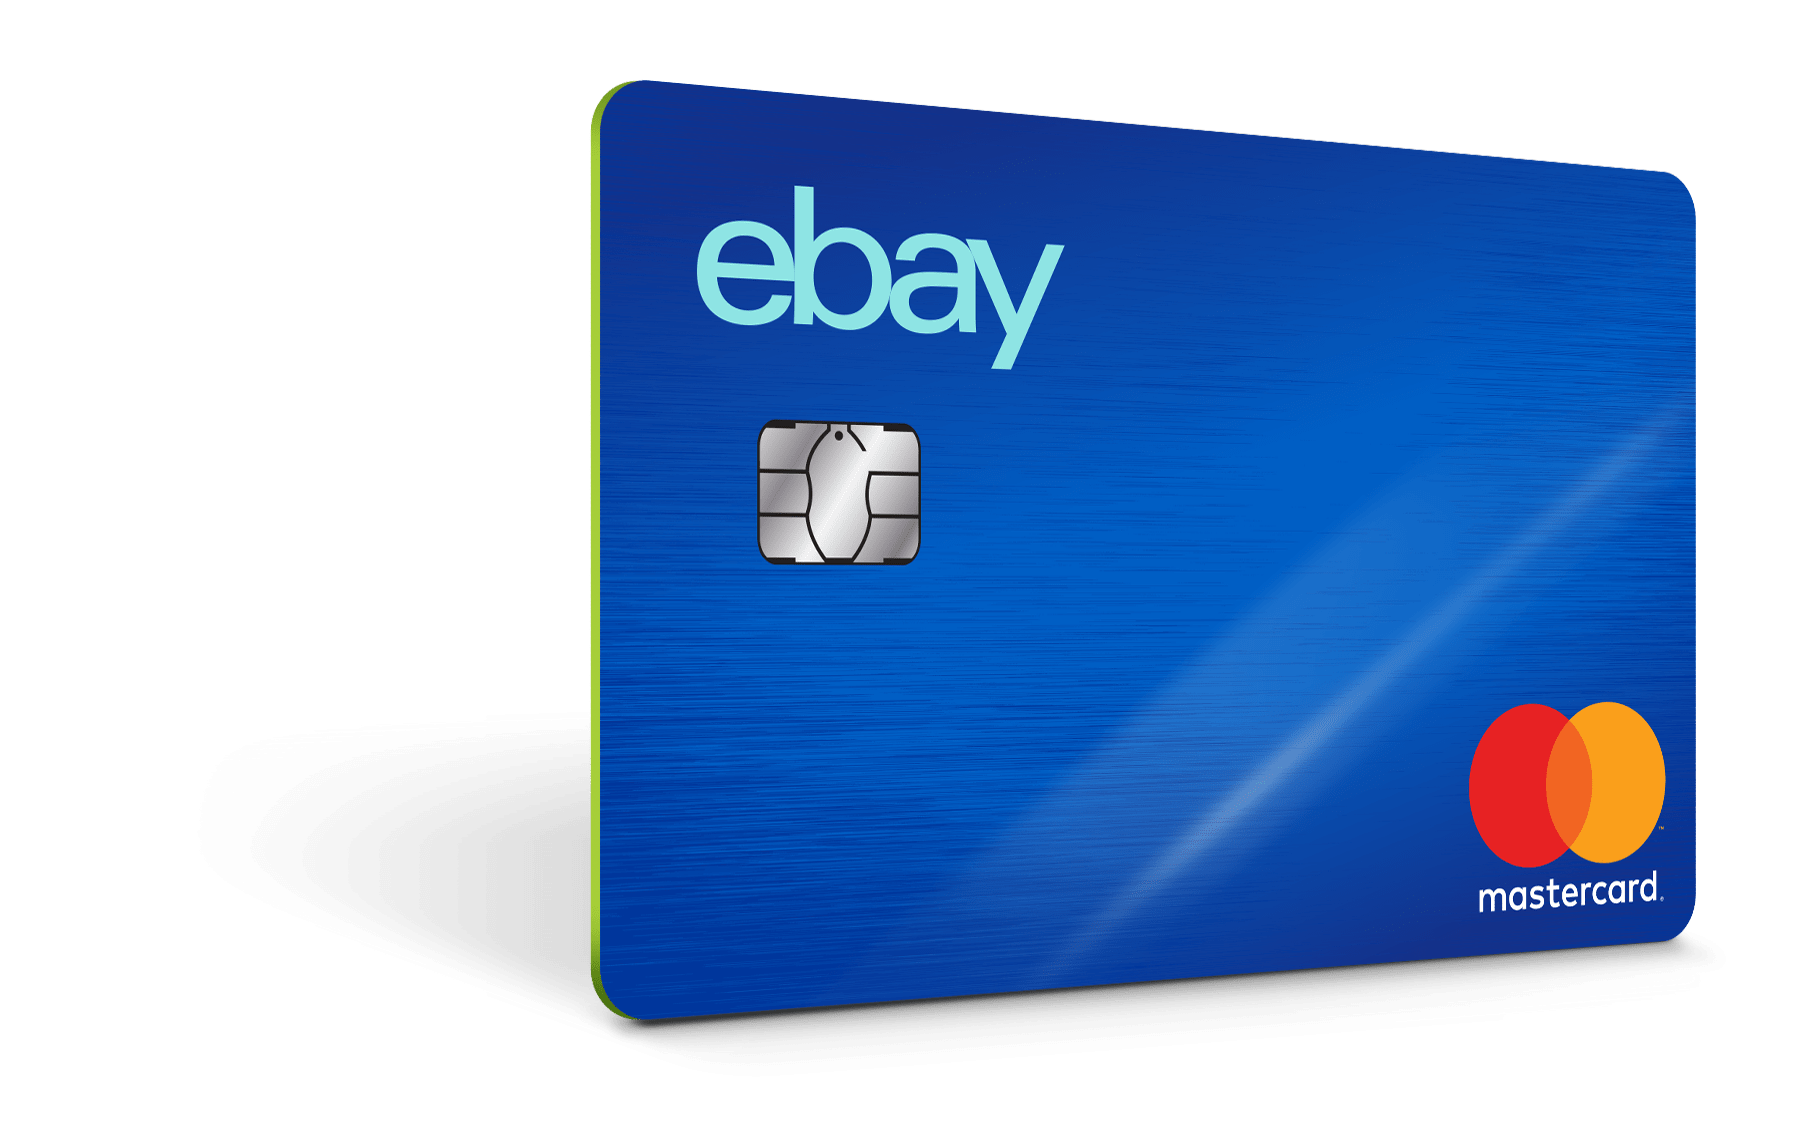 FREE $50 eBay Gift Card With a New eBay Mastercard Account!